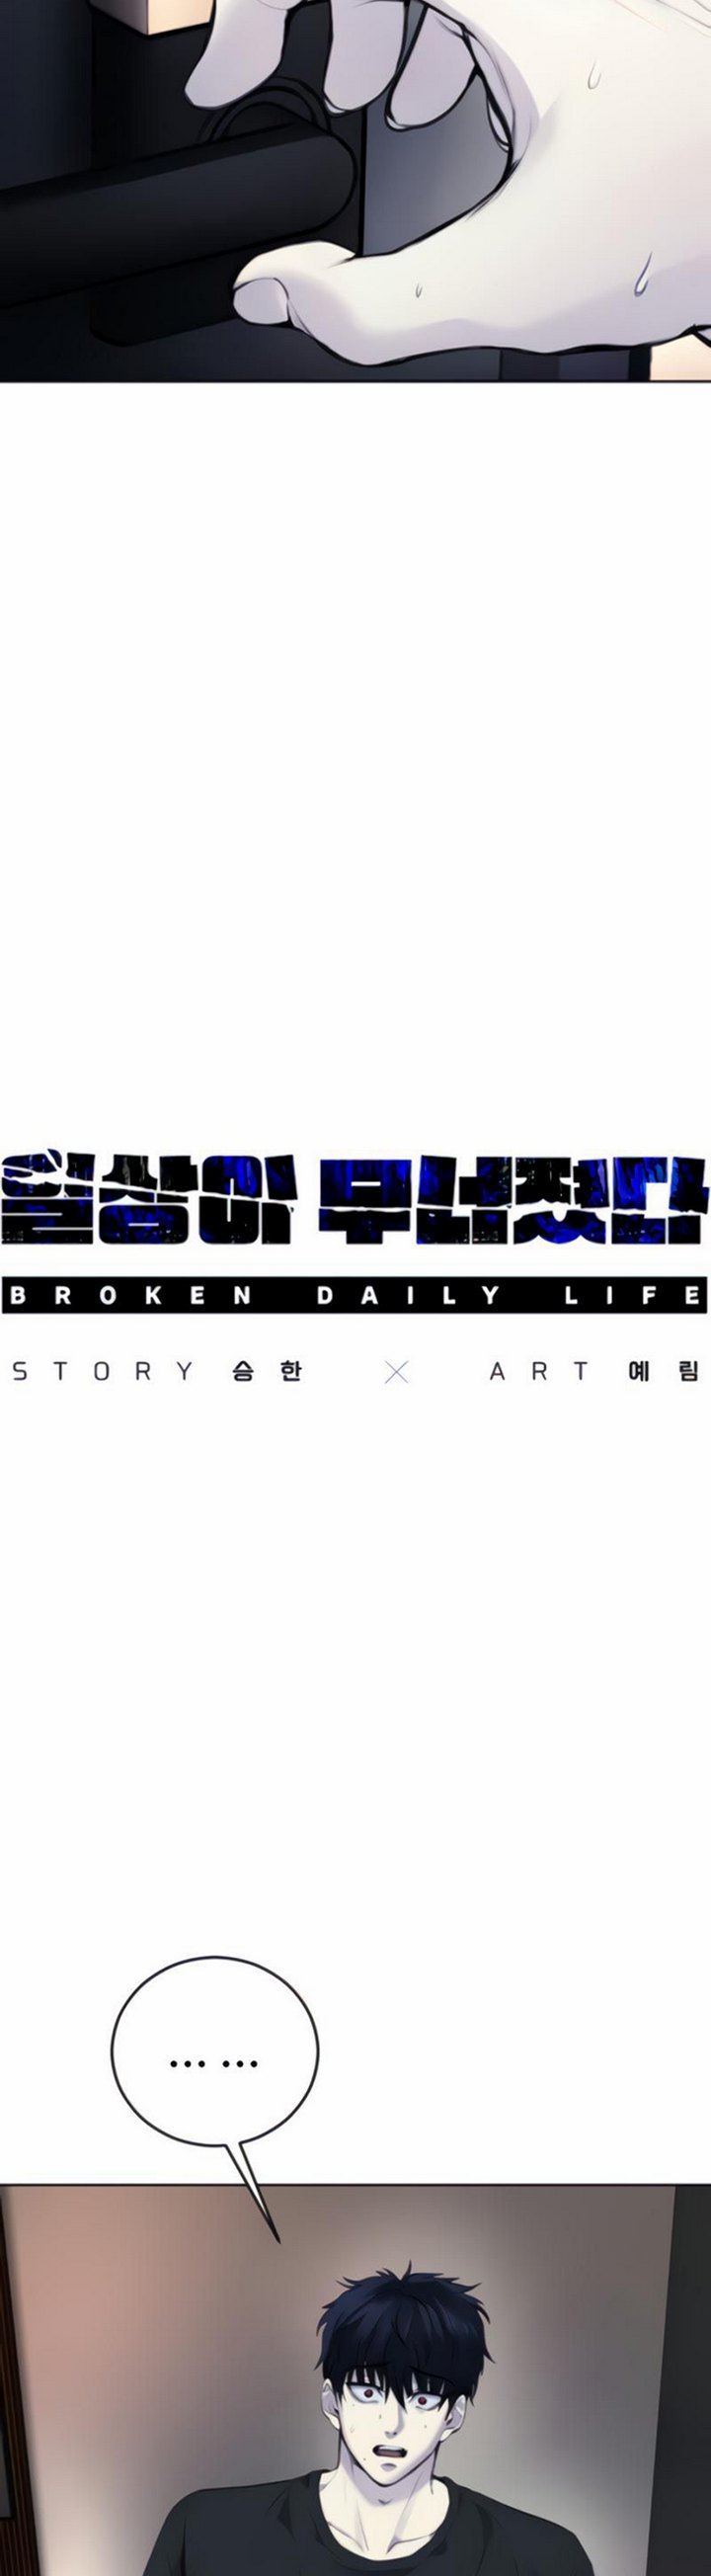 Broken Daily Life Chapter 11.1